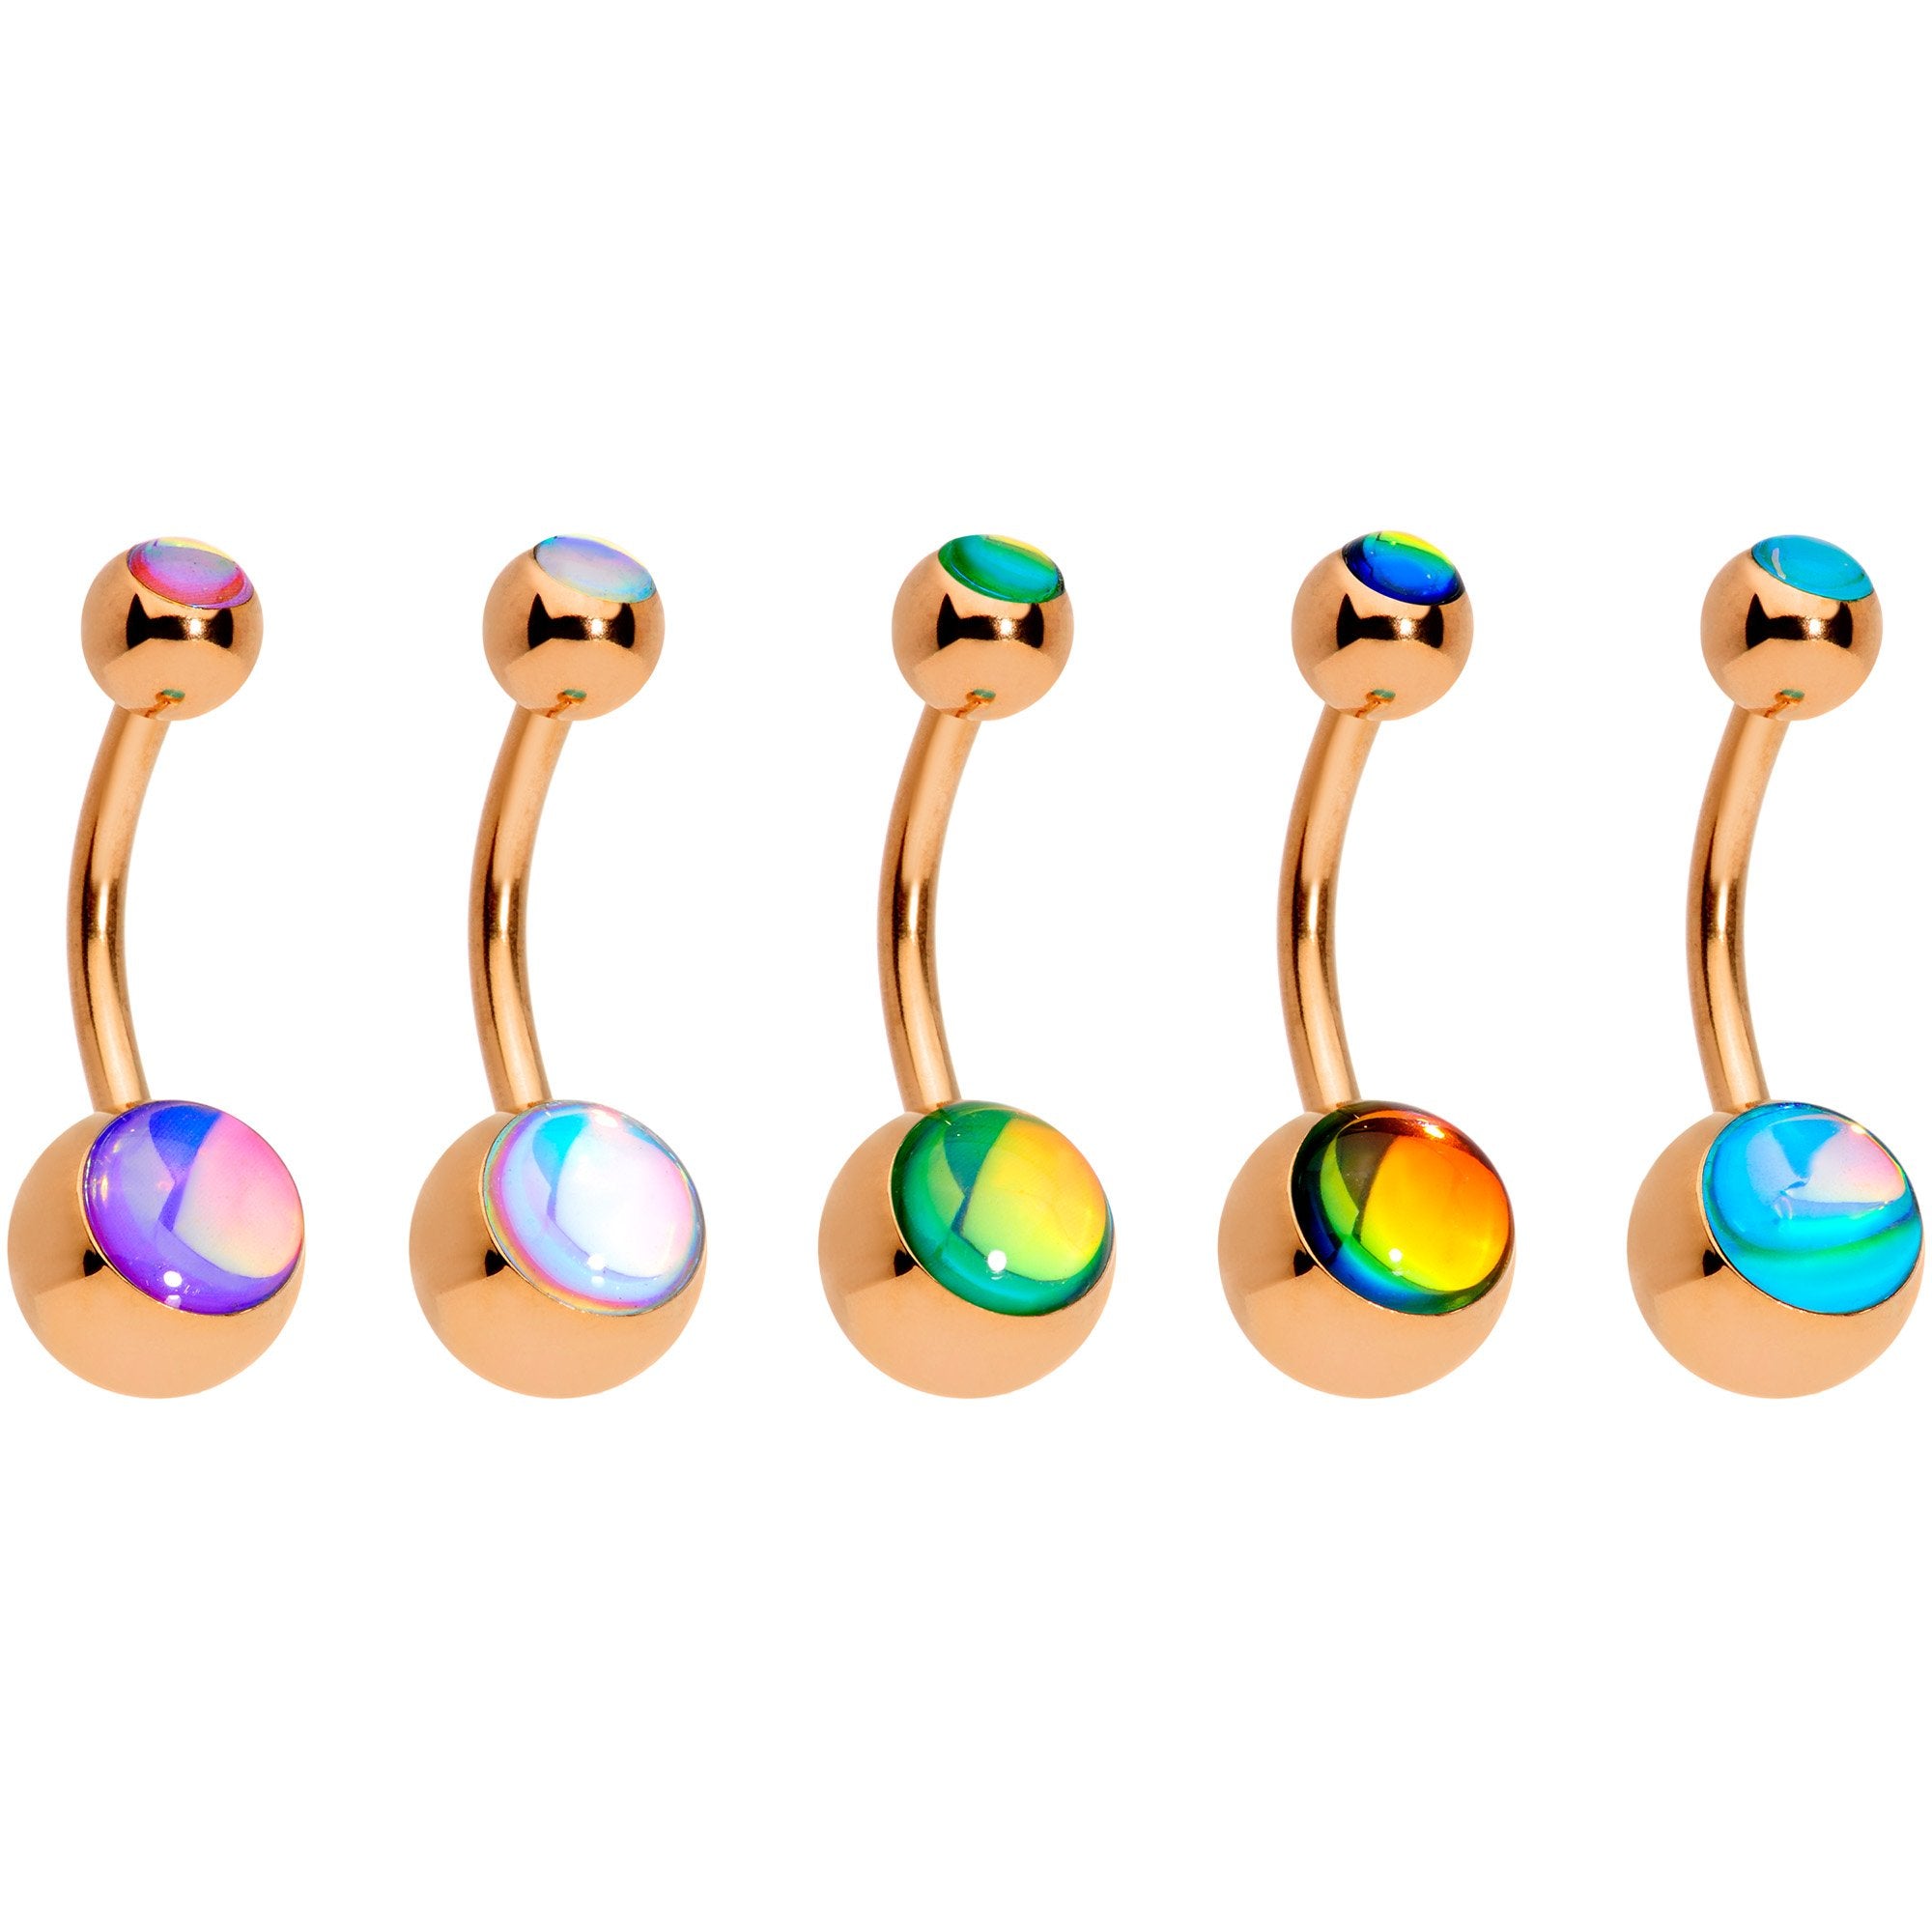 Iridescent Gem Rose Gold Tone Captivating Colors Belly Ring Set of 5